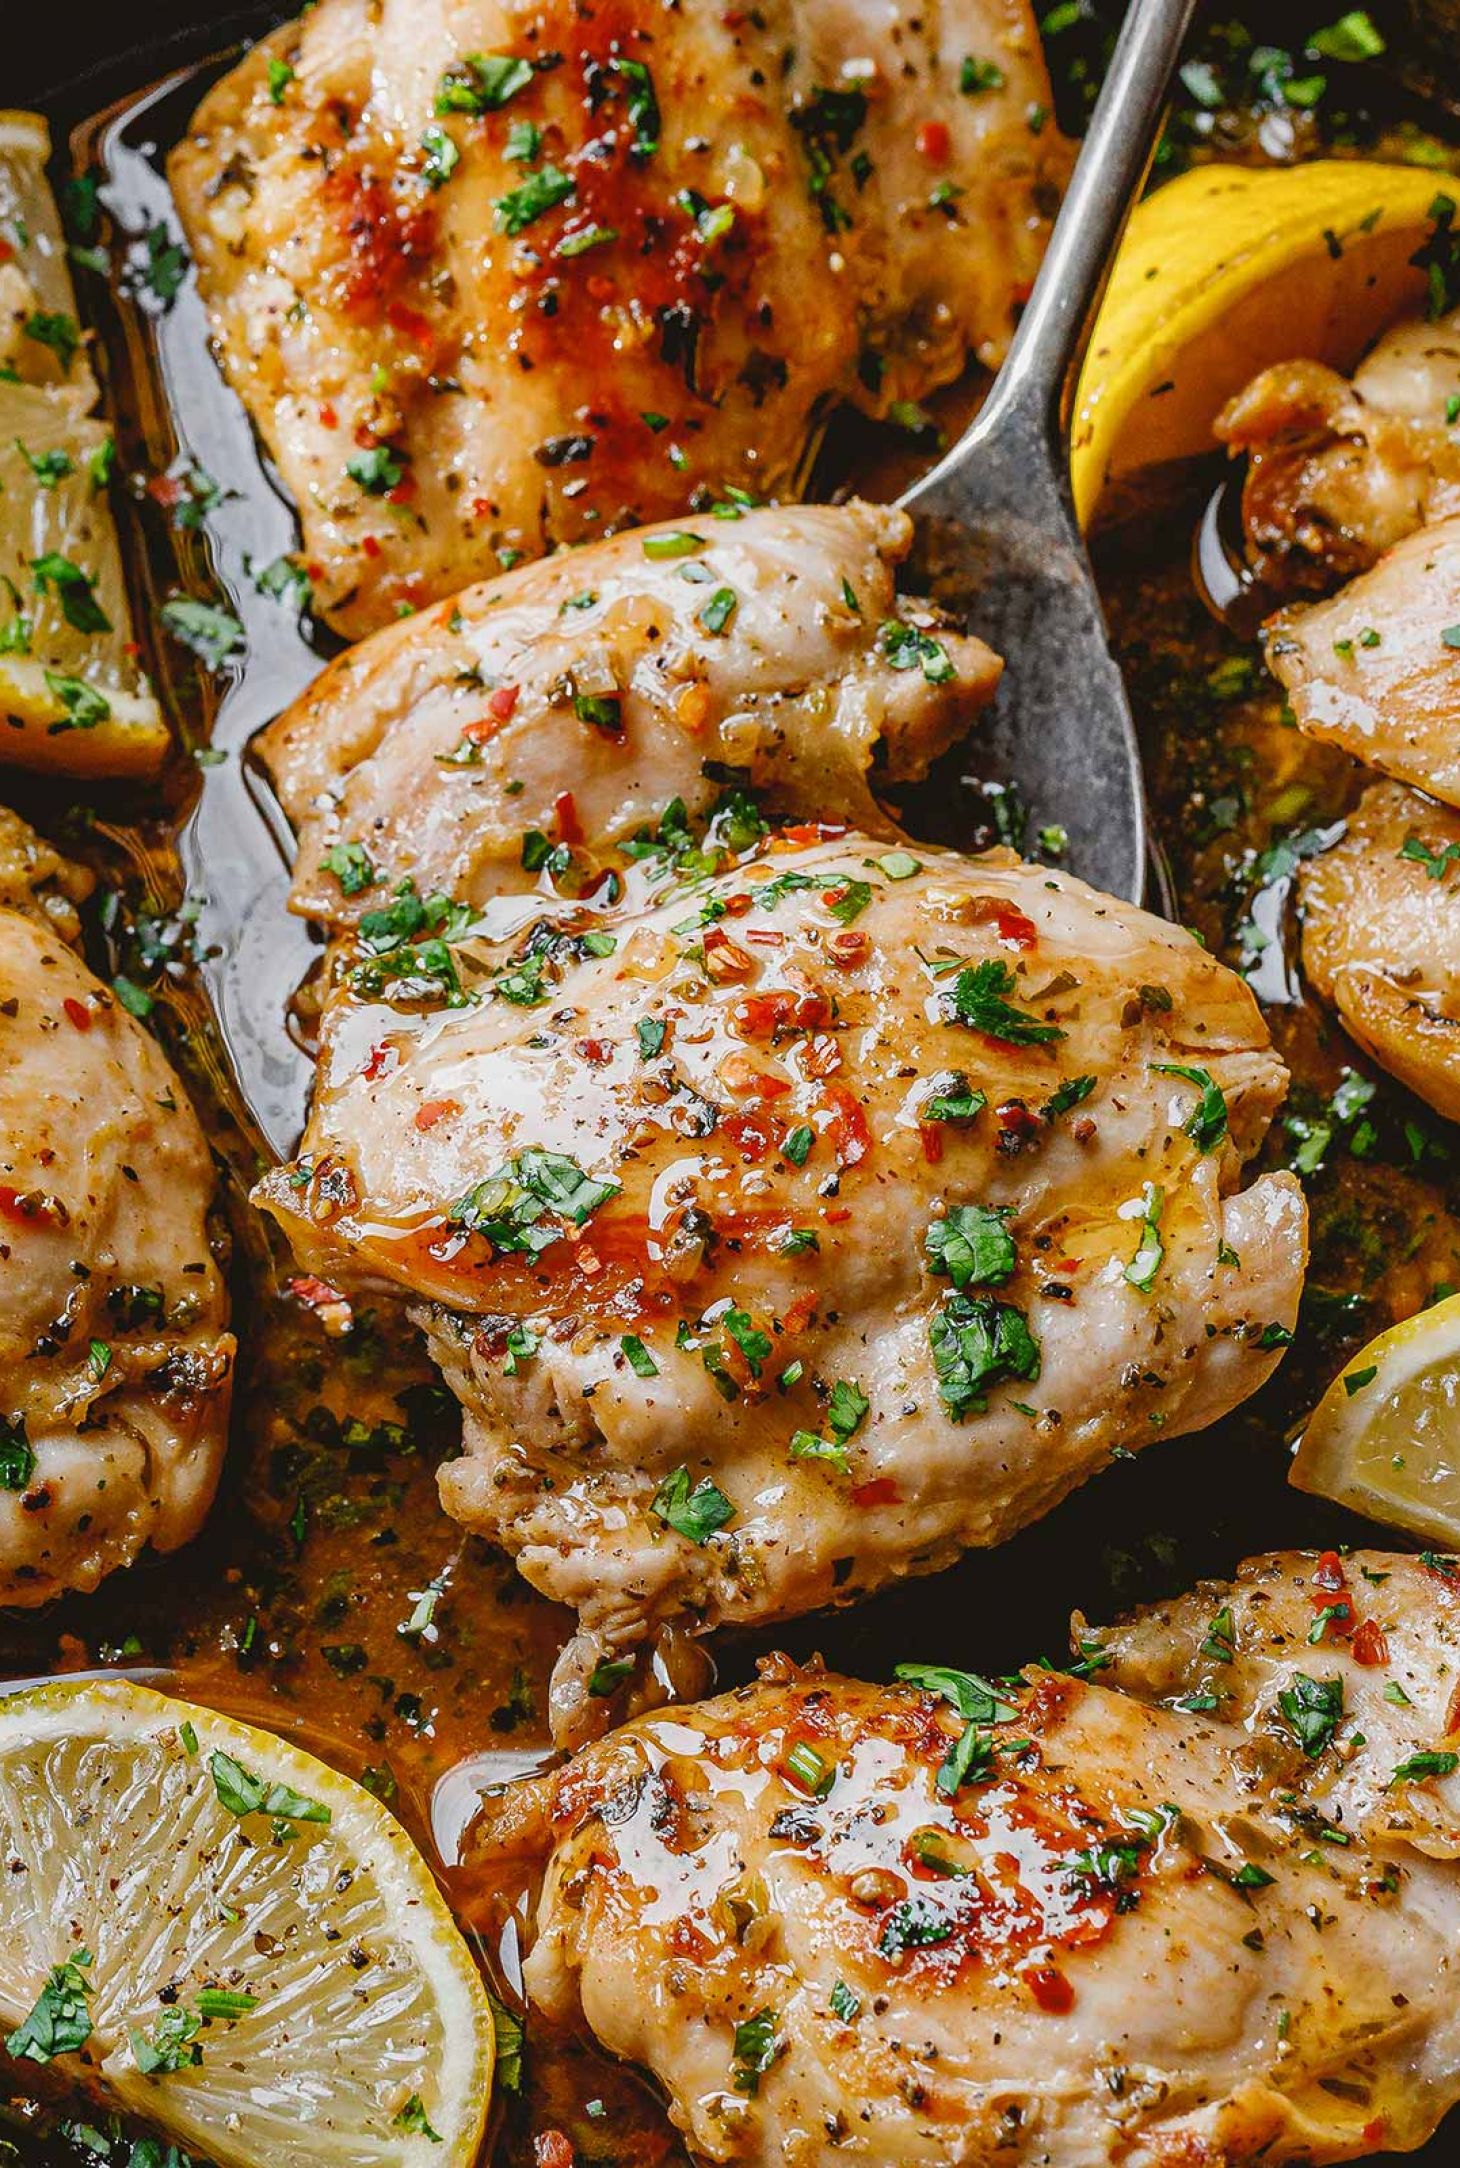 Baked Chicken Recipes: 20 Super Simple & Healthy Baked Chicken Recipes